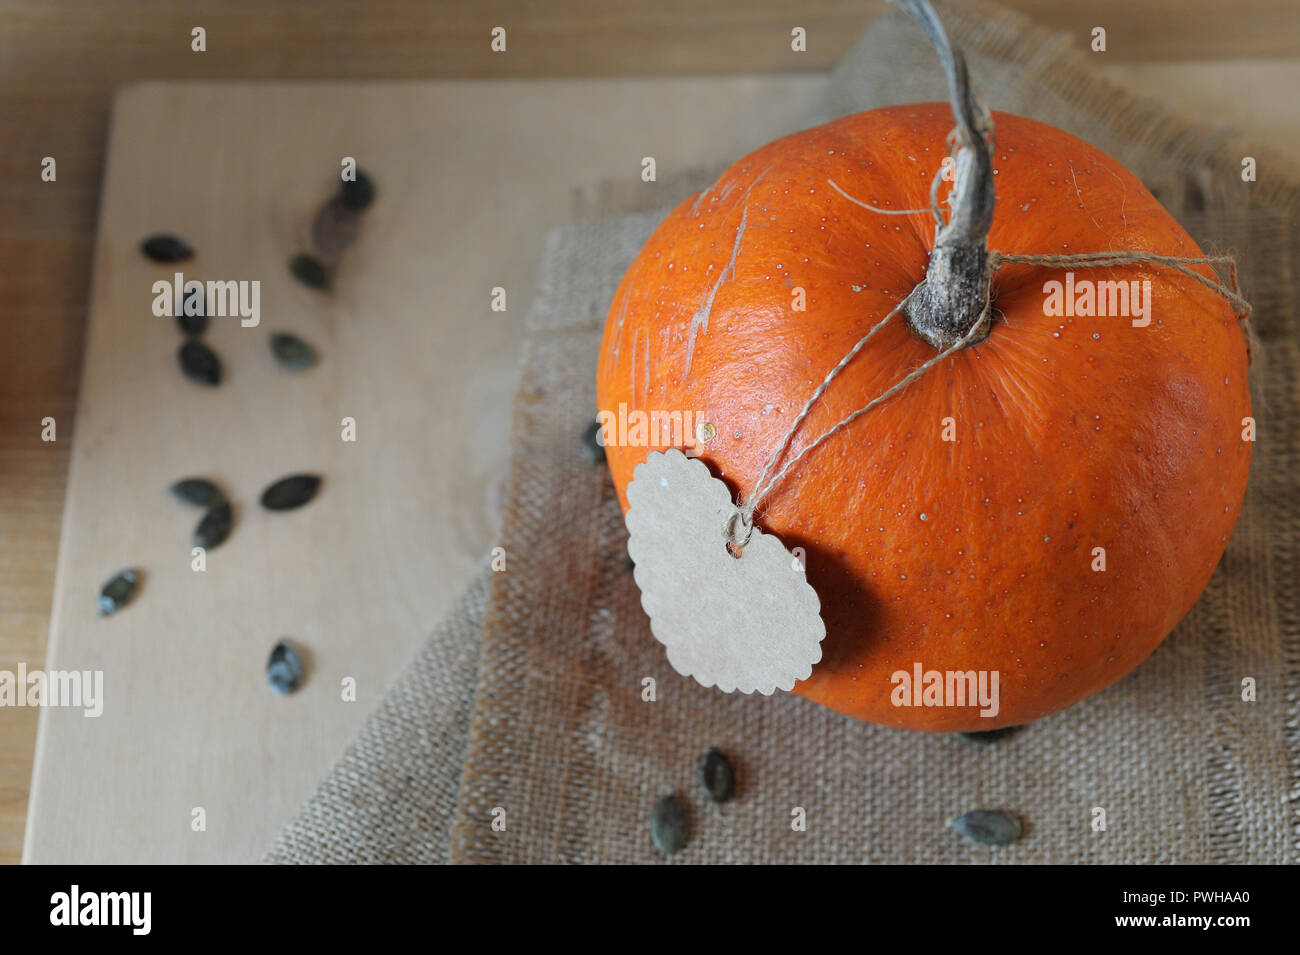 pumpkin and seeds laying on the table,it's time to eat a pumpkin,autumn,cardboard heart Stock Photo